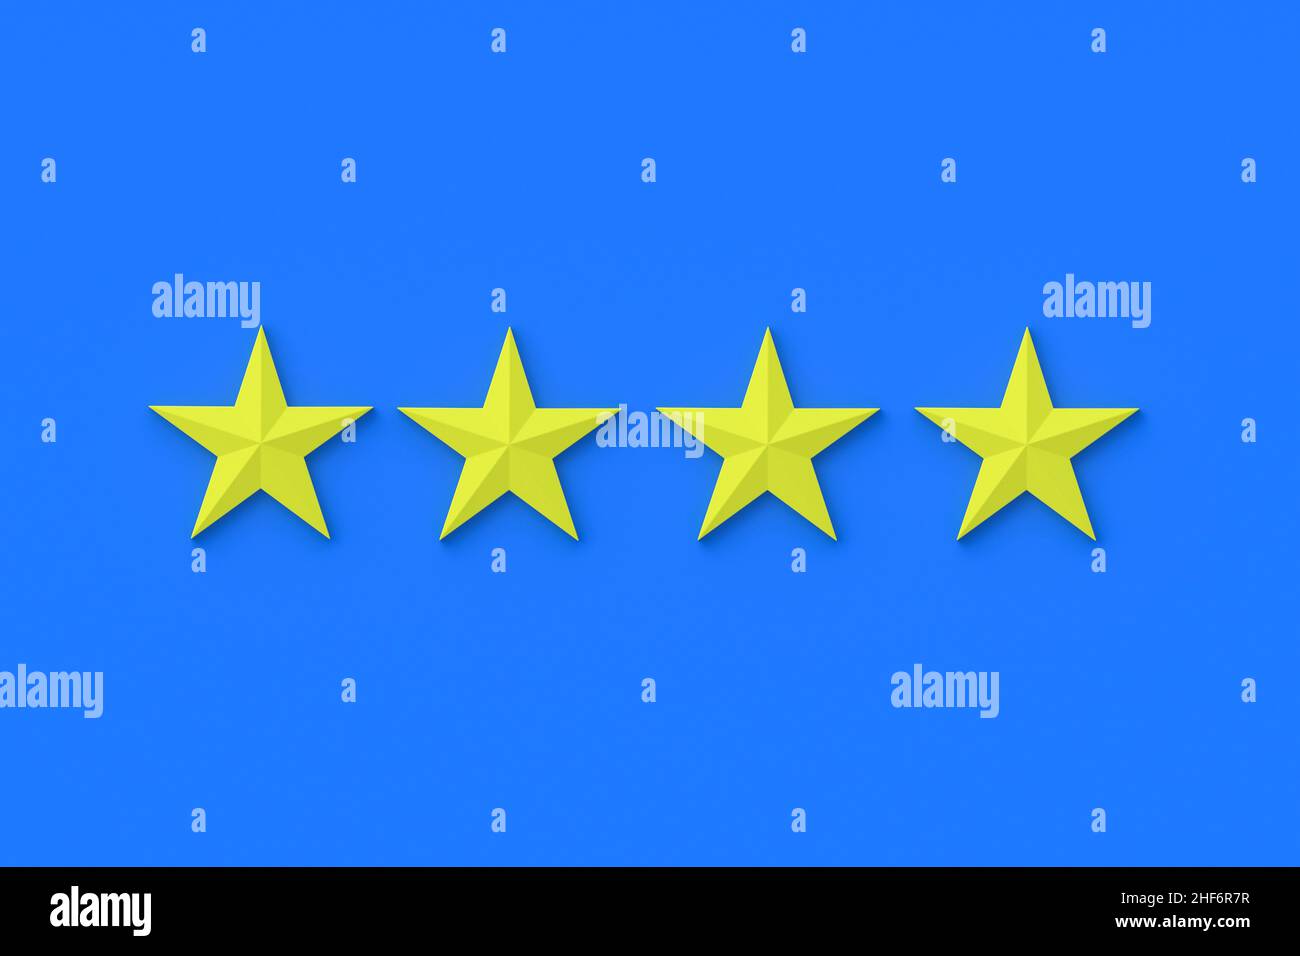 Rating stars bring accurate and easy to understand information about products or services. They help us make informed decisions quickly and confidently. Whether we choose hotels, restaurants or any kind of service, knowing the rating stars is a must. Click to see how the rating stars can help you make the right choices.